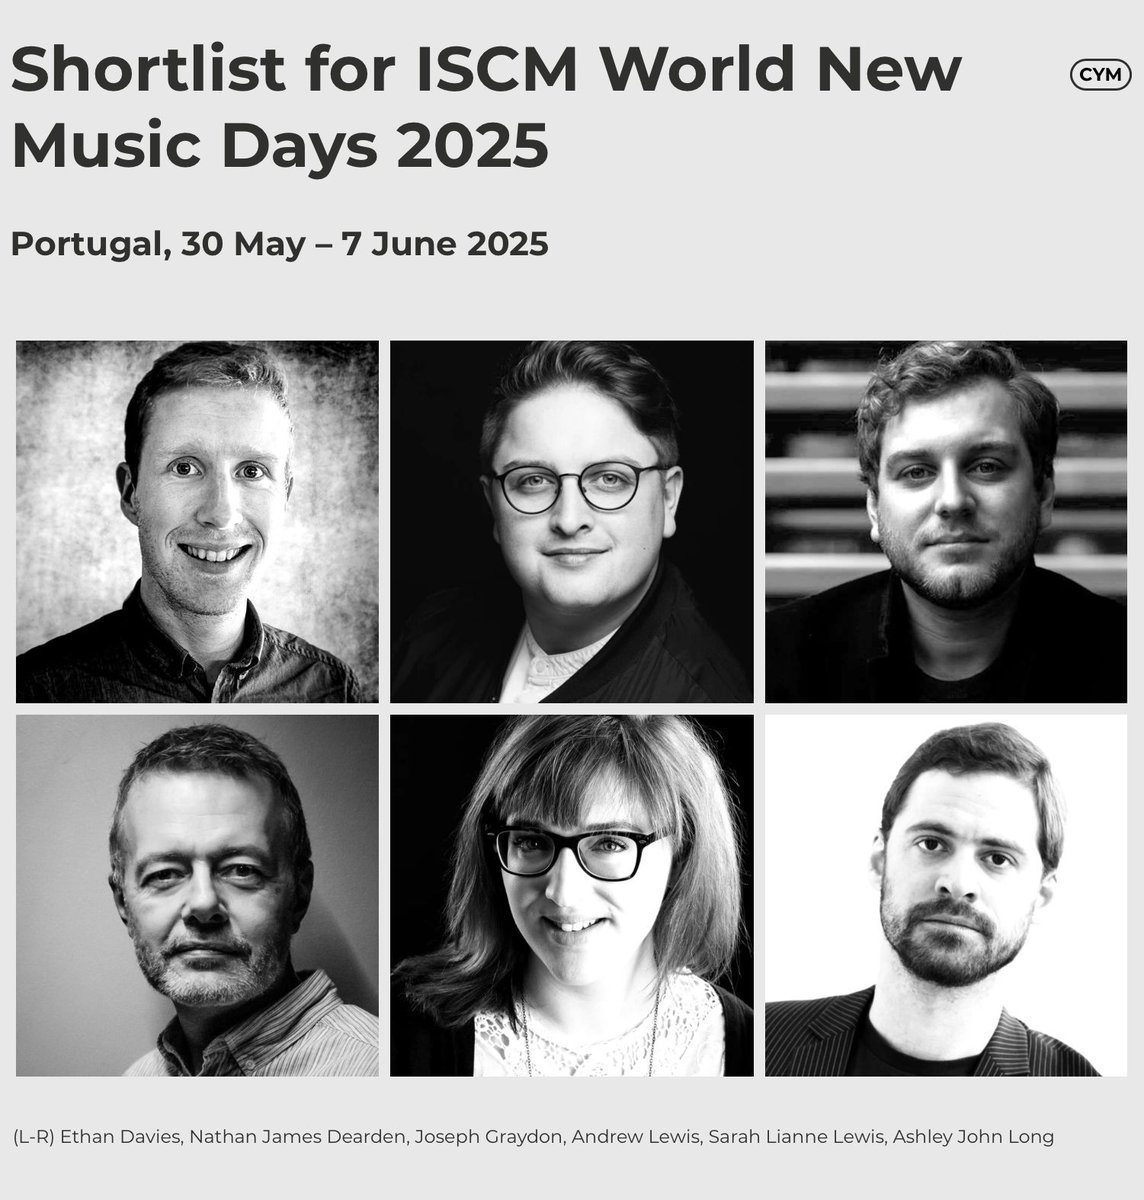 I am thrilled that 'Sunflowers in Autumn' (2019) has been selected for the Wales Section shortlist for the ISCM's World New Music Days 2025. It's an honour to represent Wales alongside these colleagues and friends whose music I greatly admire. Wishing all composers the best!